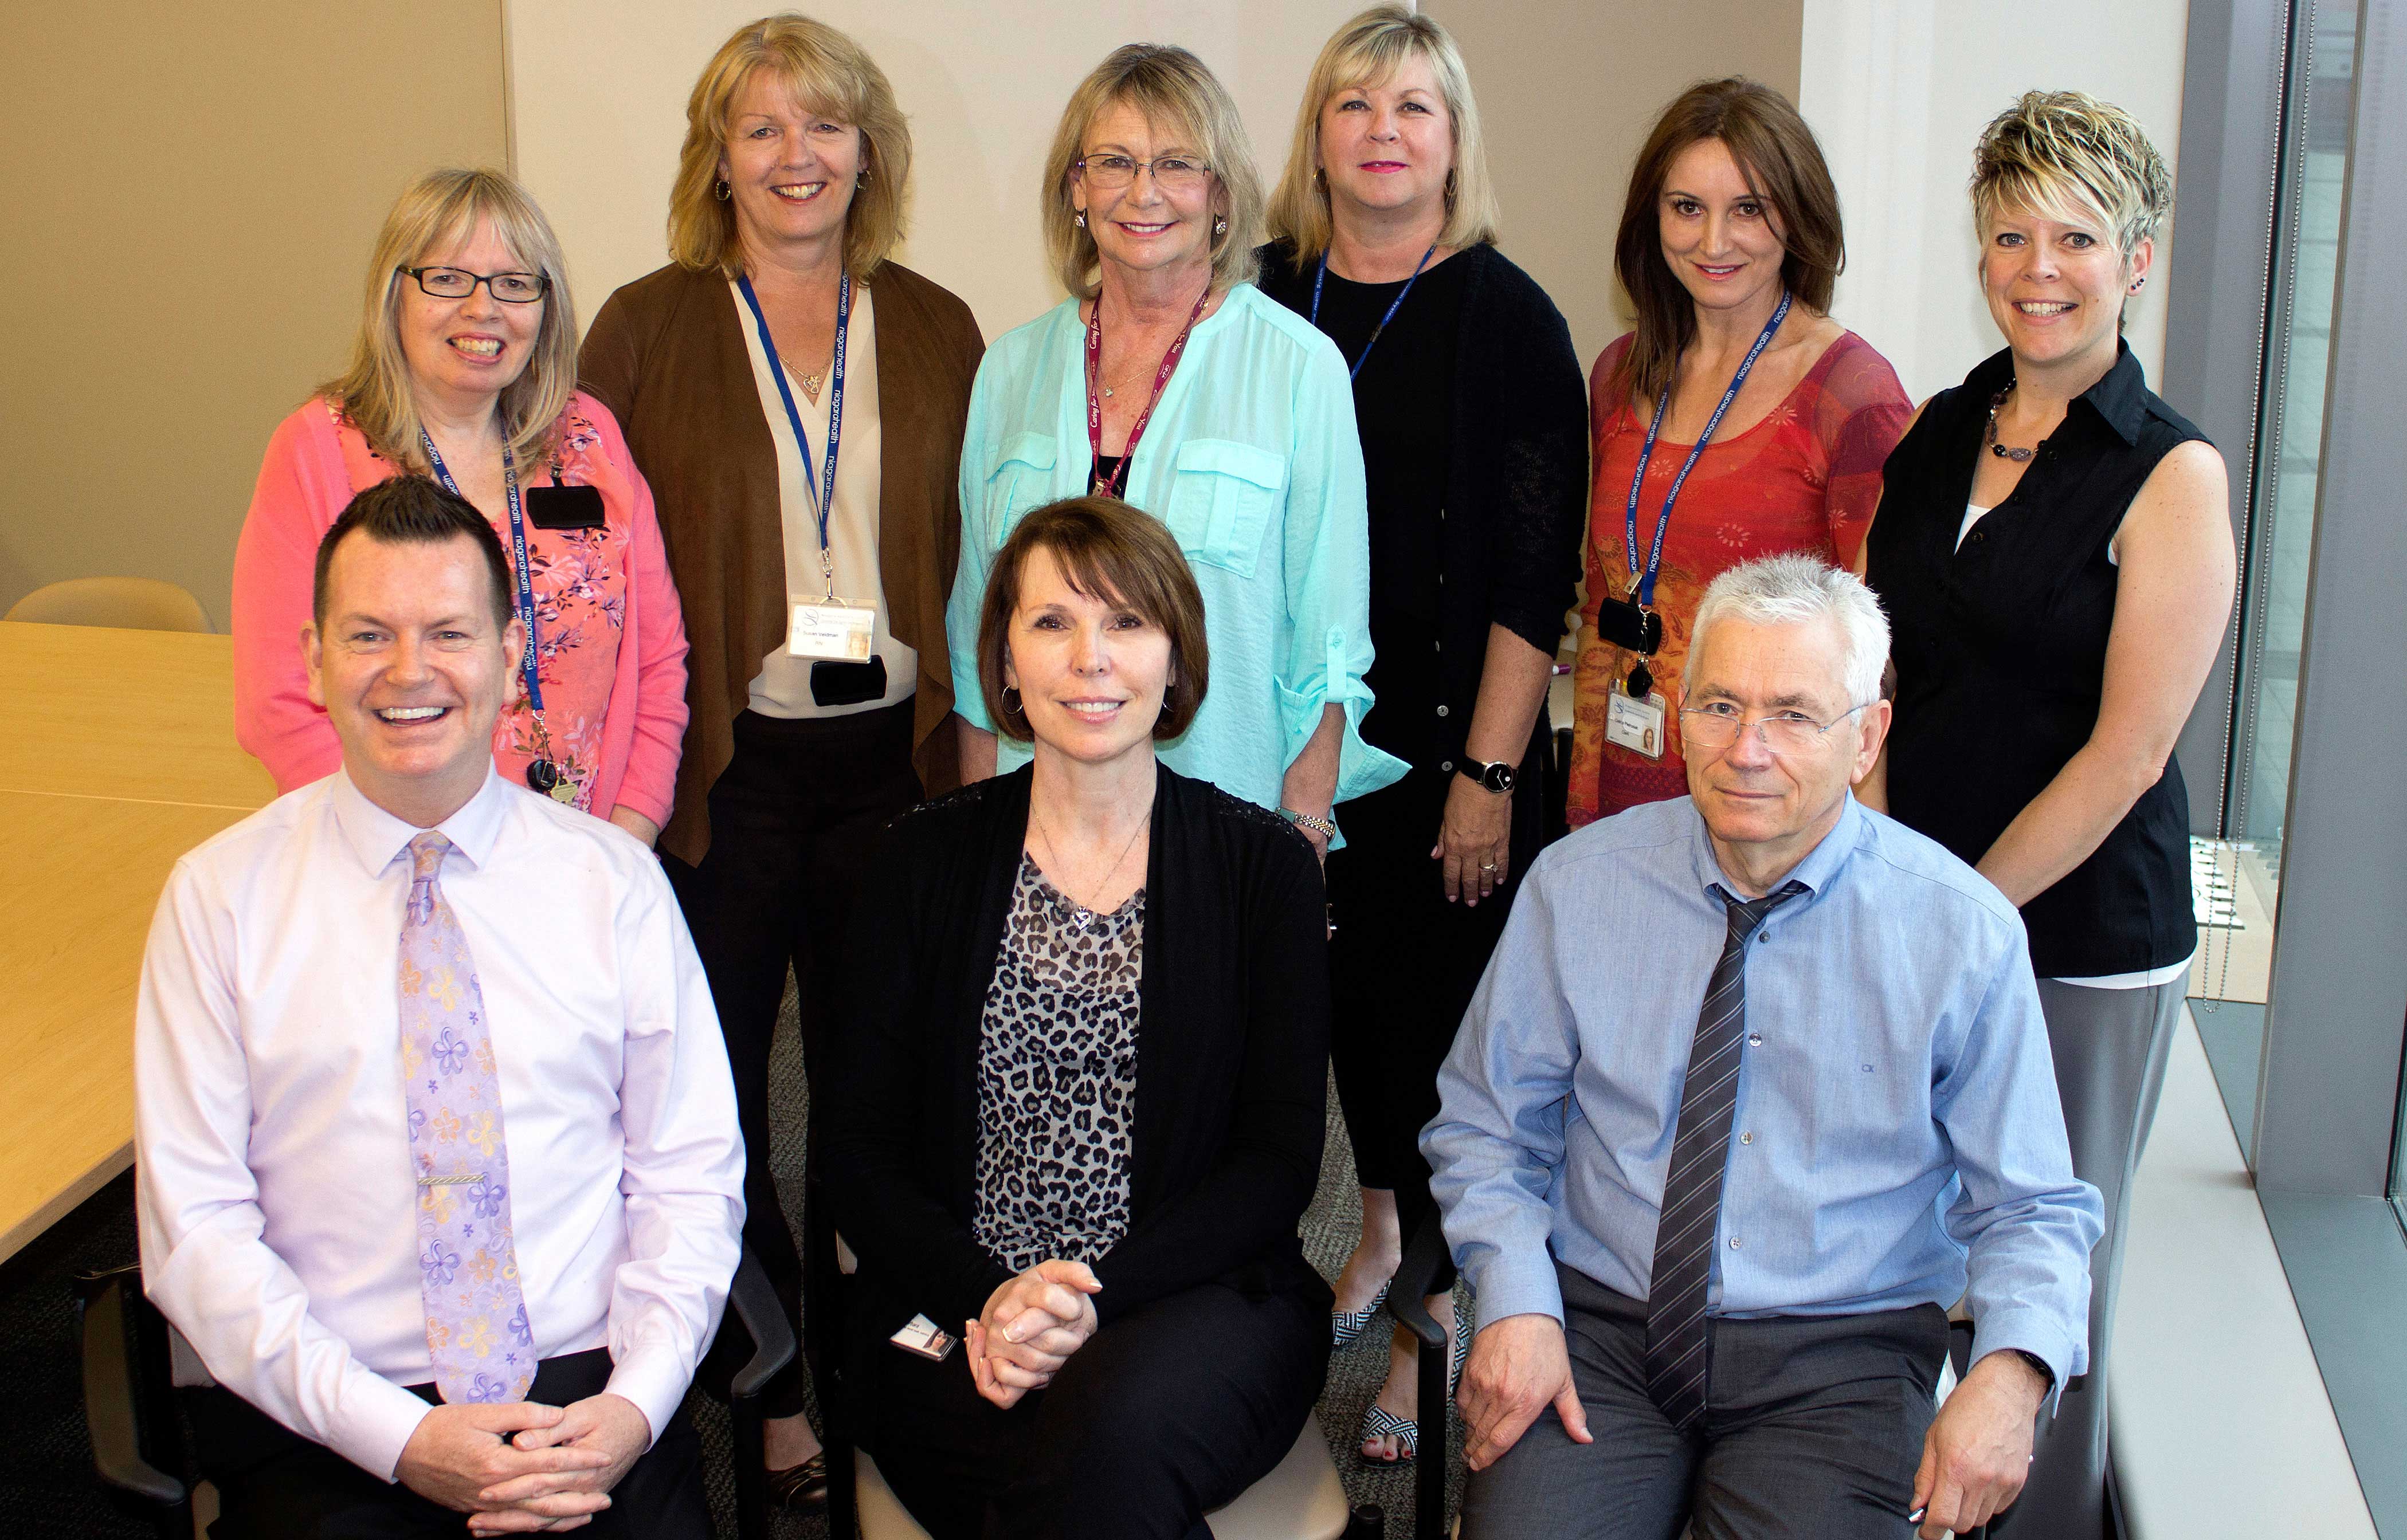 Mental health team introduces new program to increase access to care.